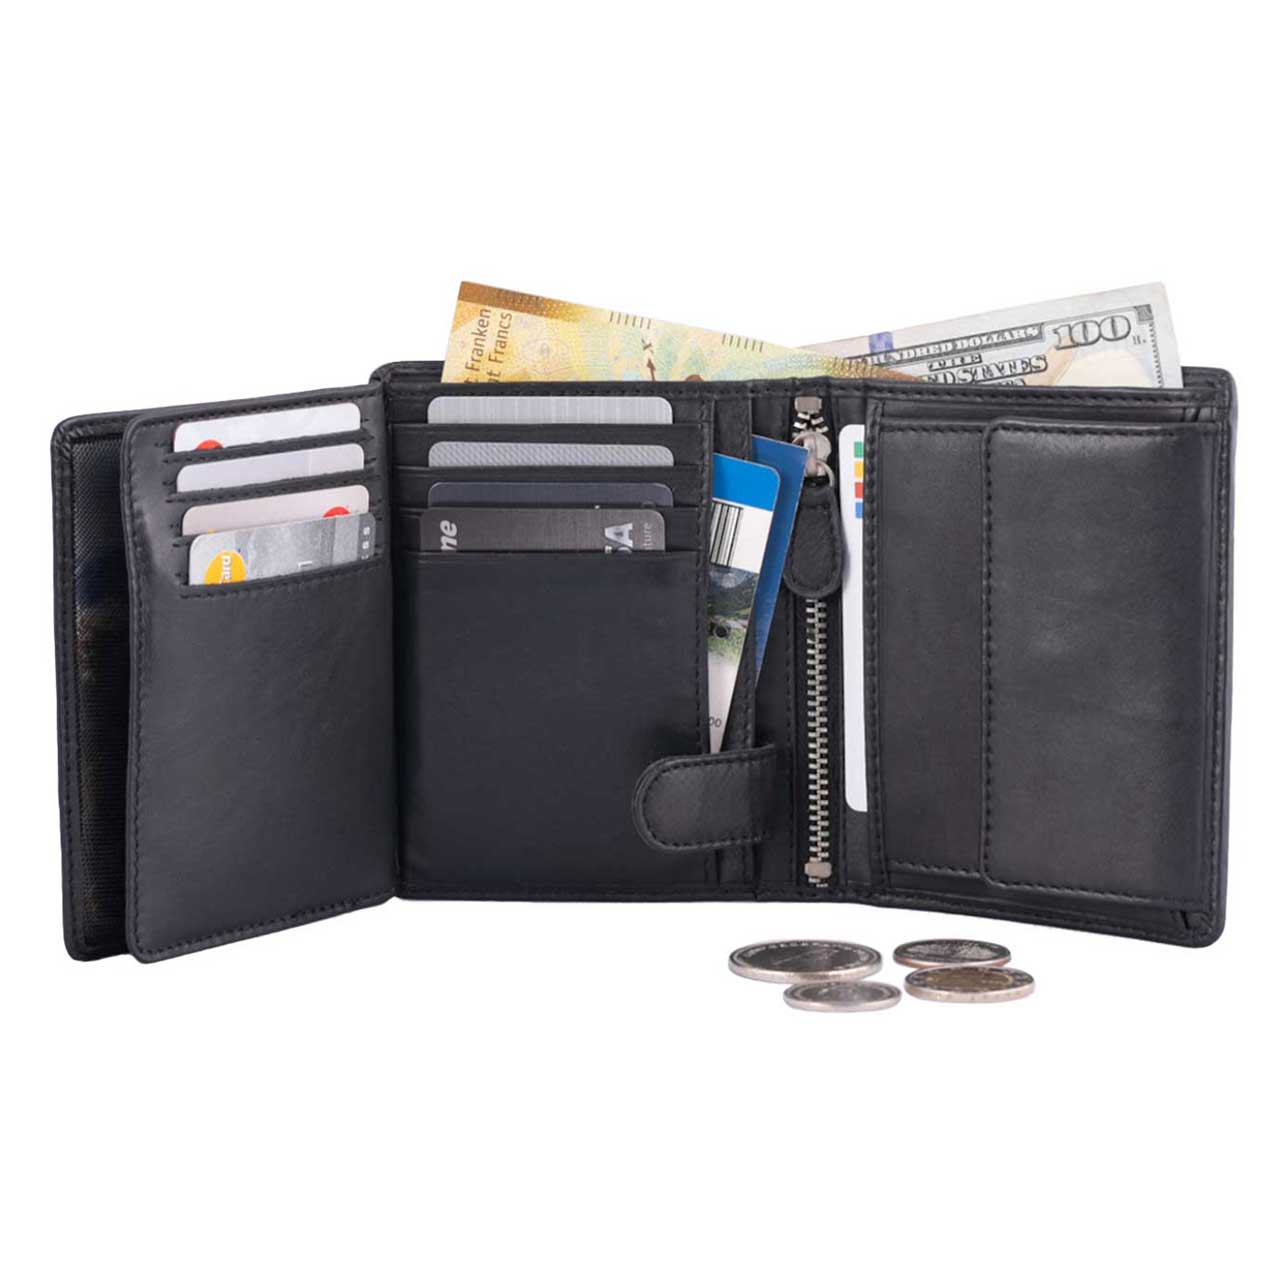 DiLoro Men's Vertical Leather Bifold Flip ID Zip Coin Wallet Black with RFID Protection - Fully Open View w/Coins